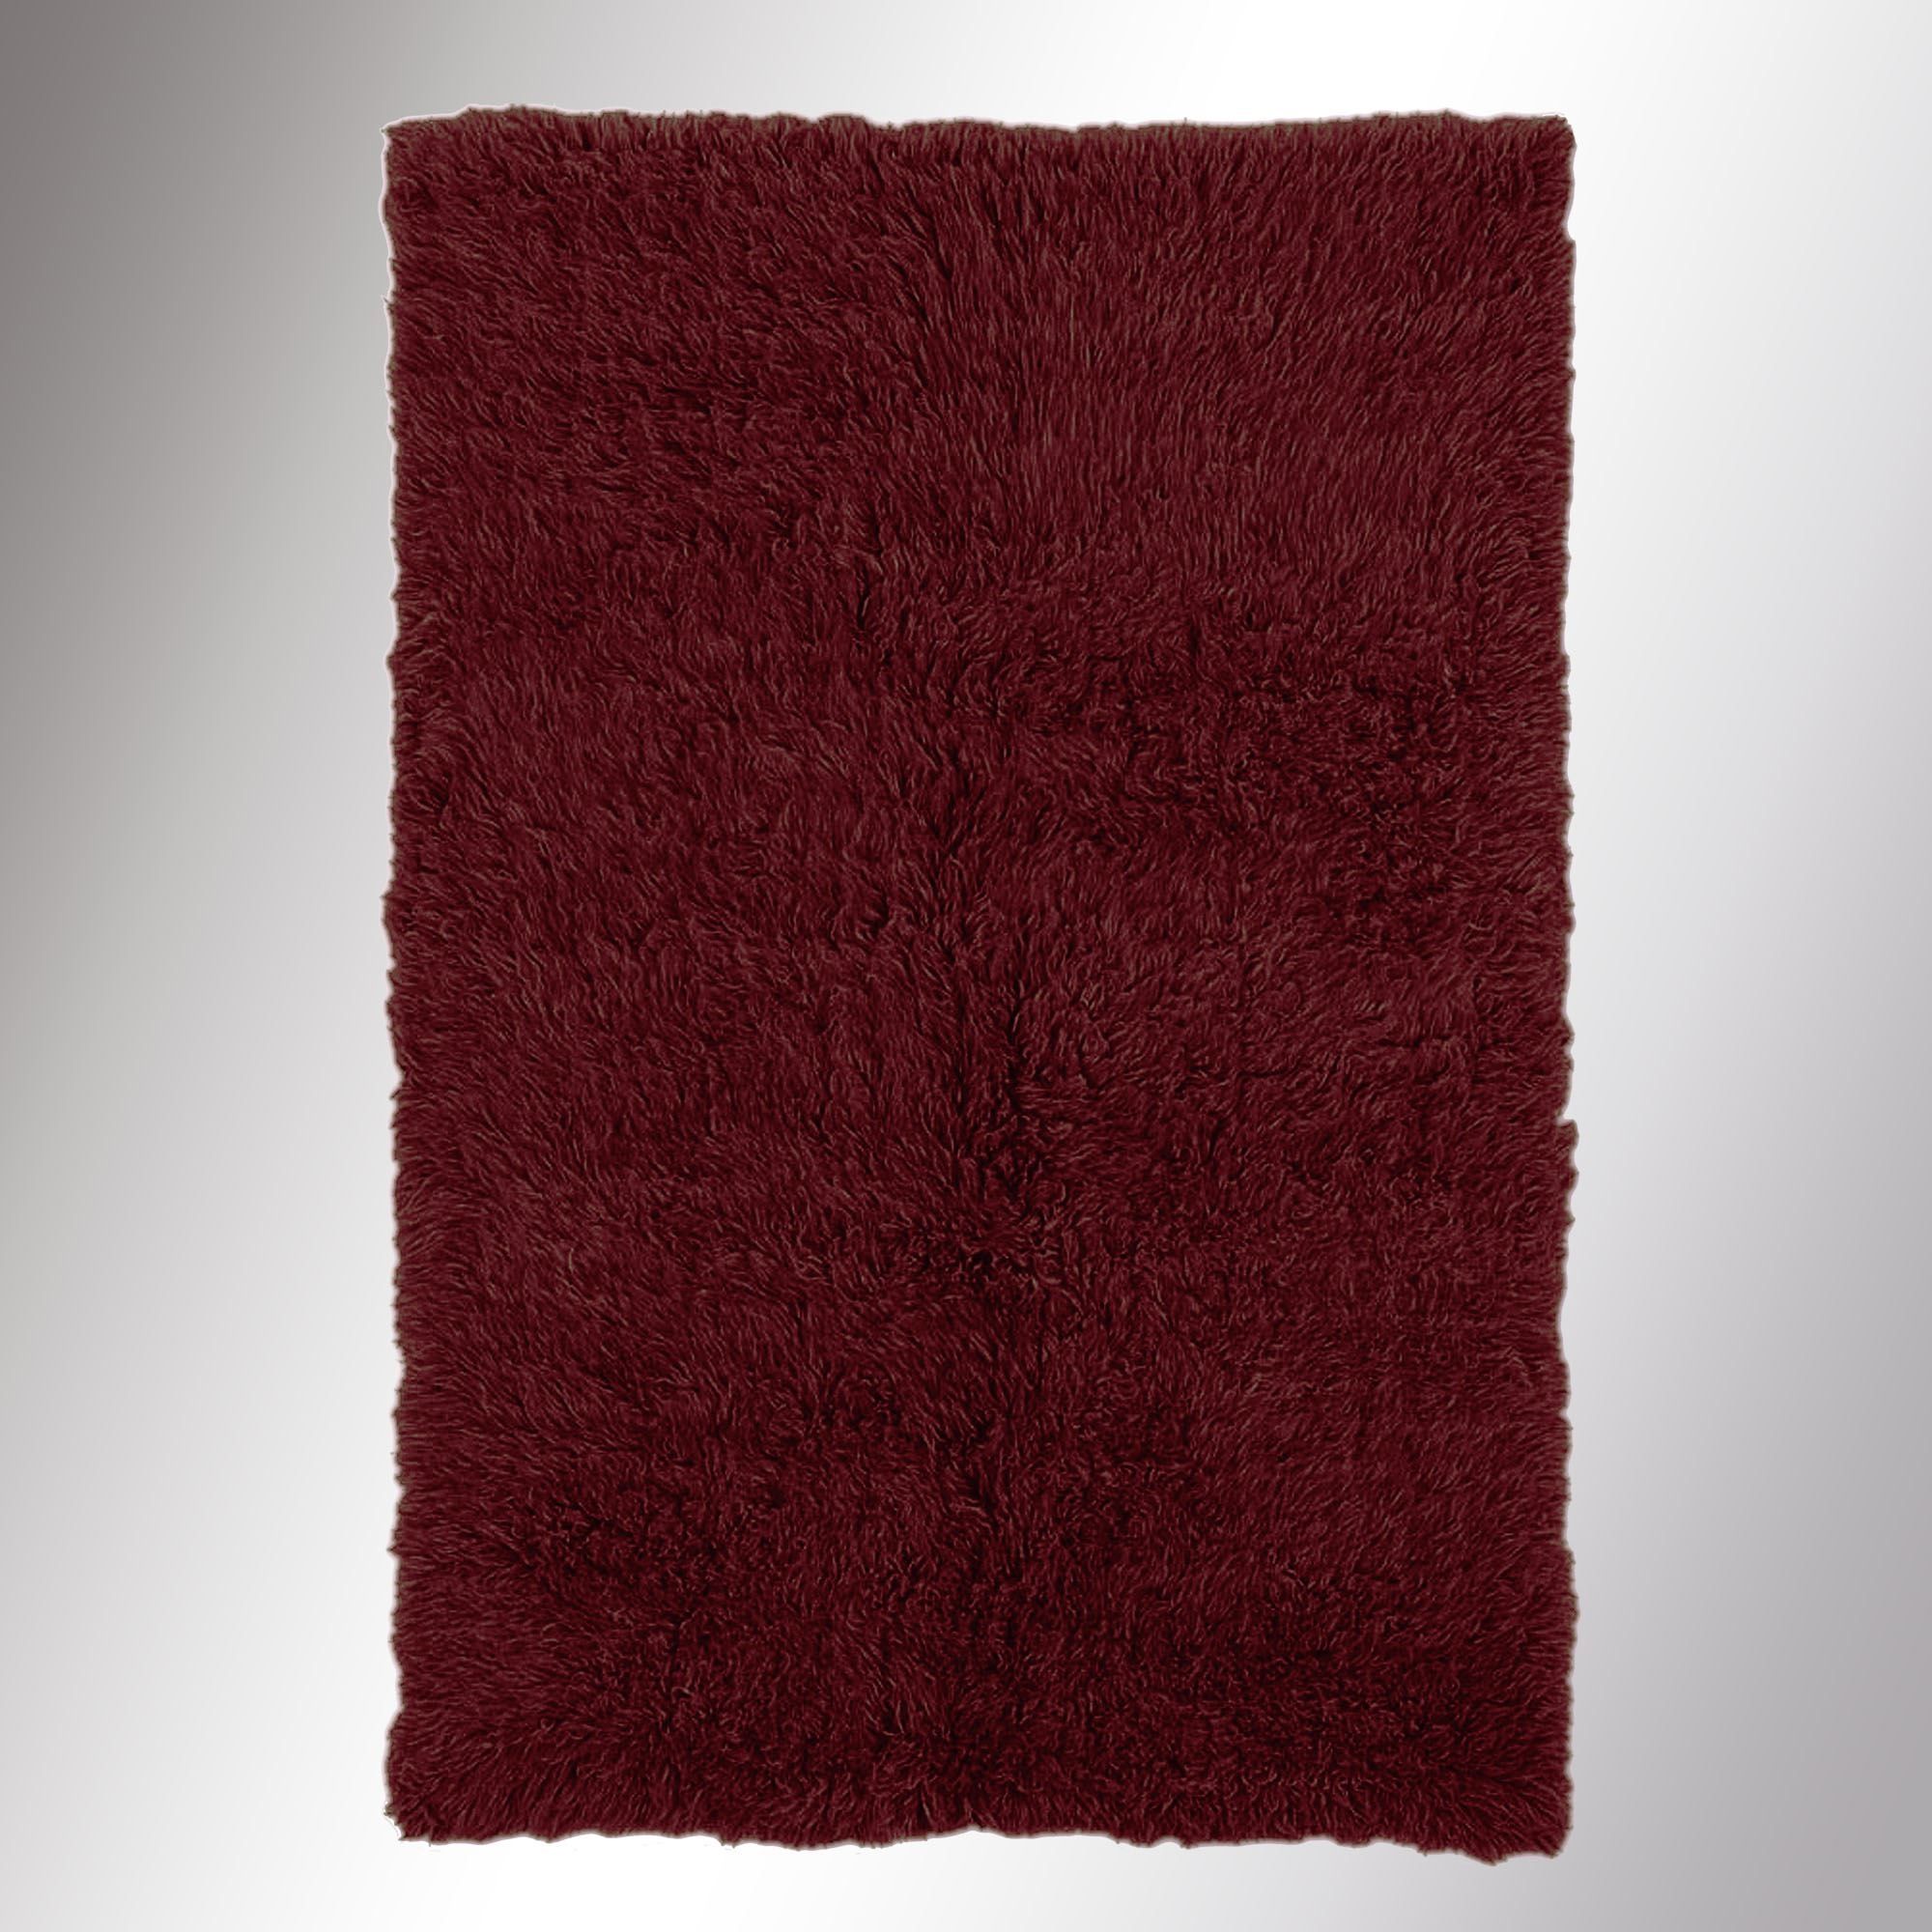 Burgundy Flokati Wool Shag Area Rugs With Wool Shag Area Rugs (View 13 of 15)